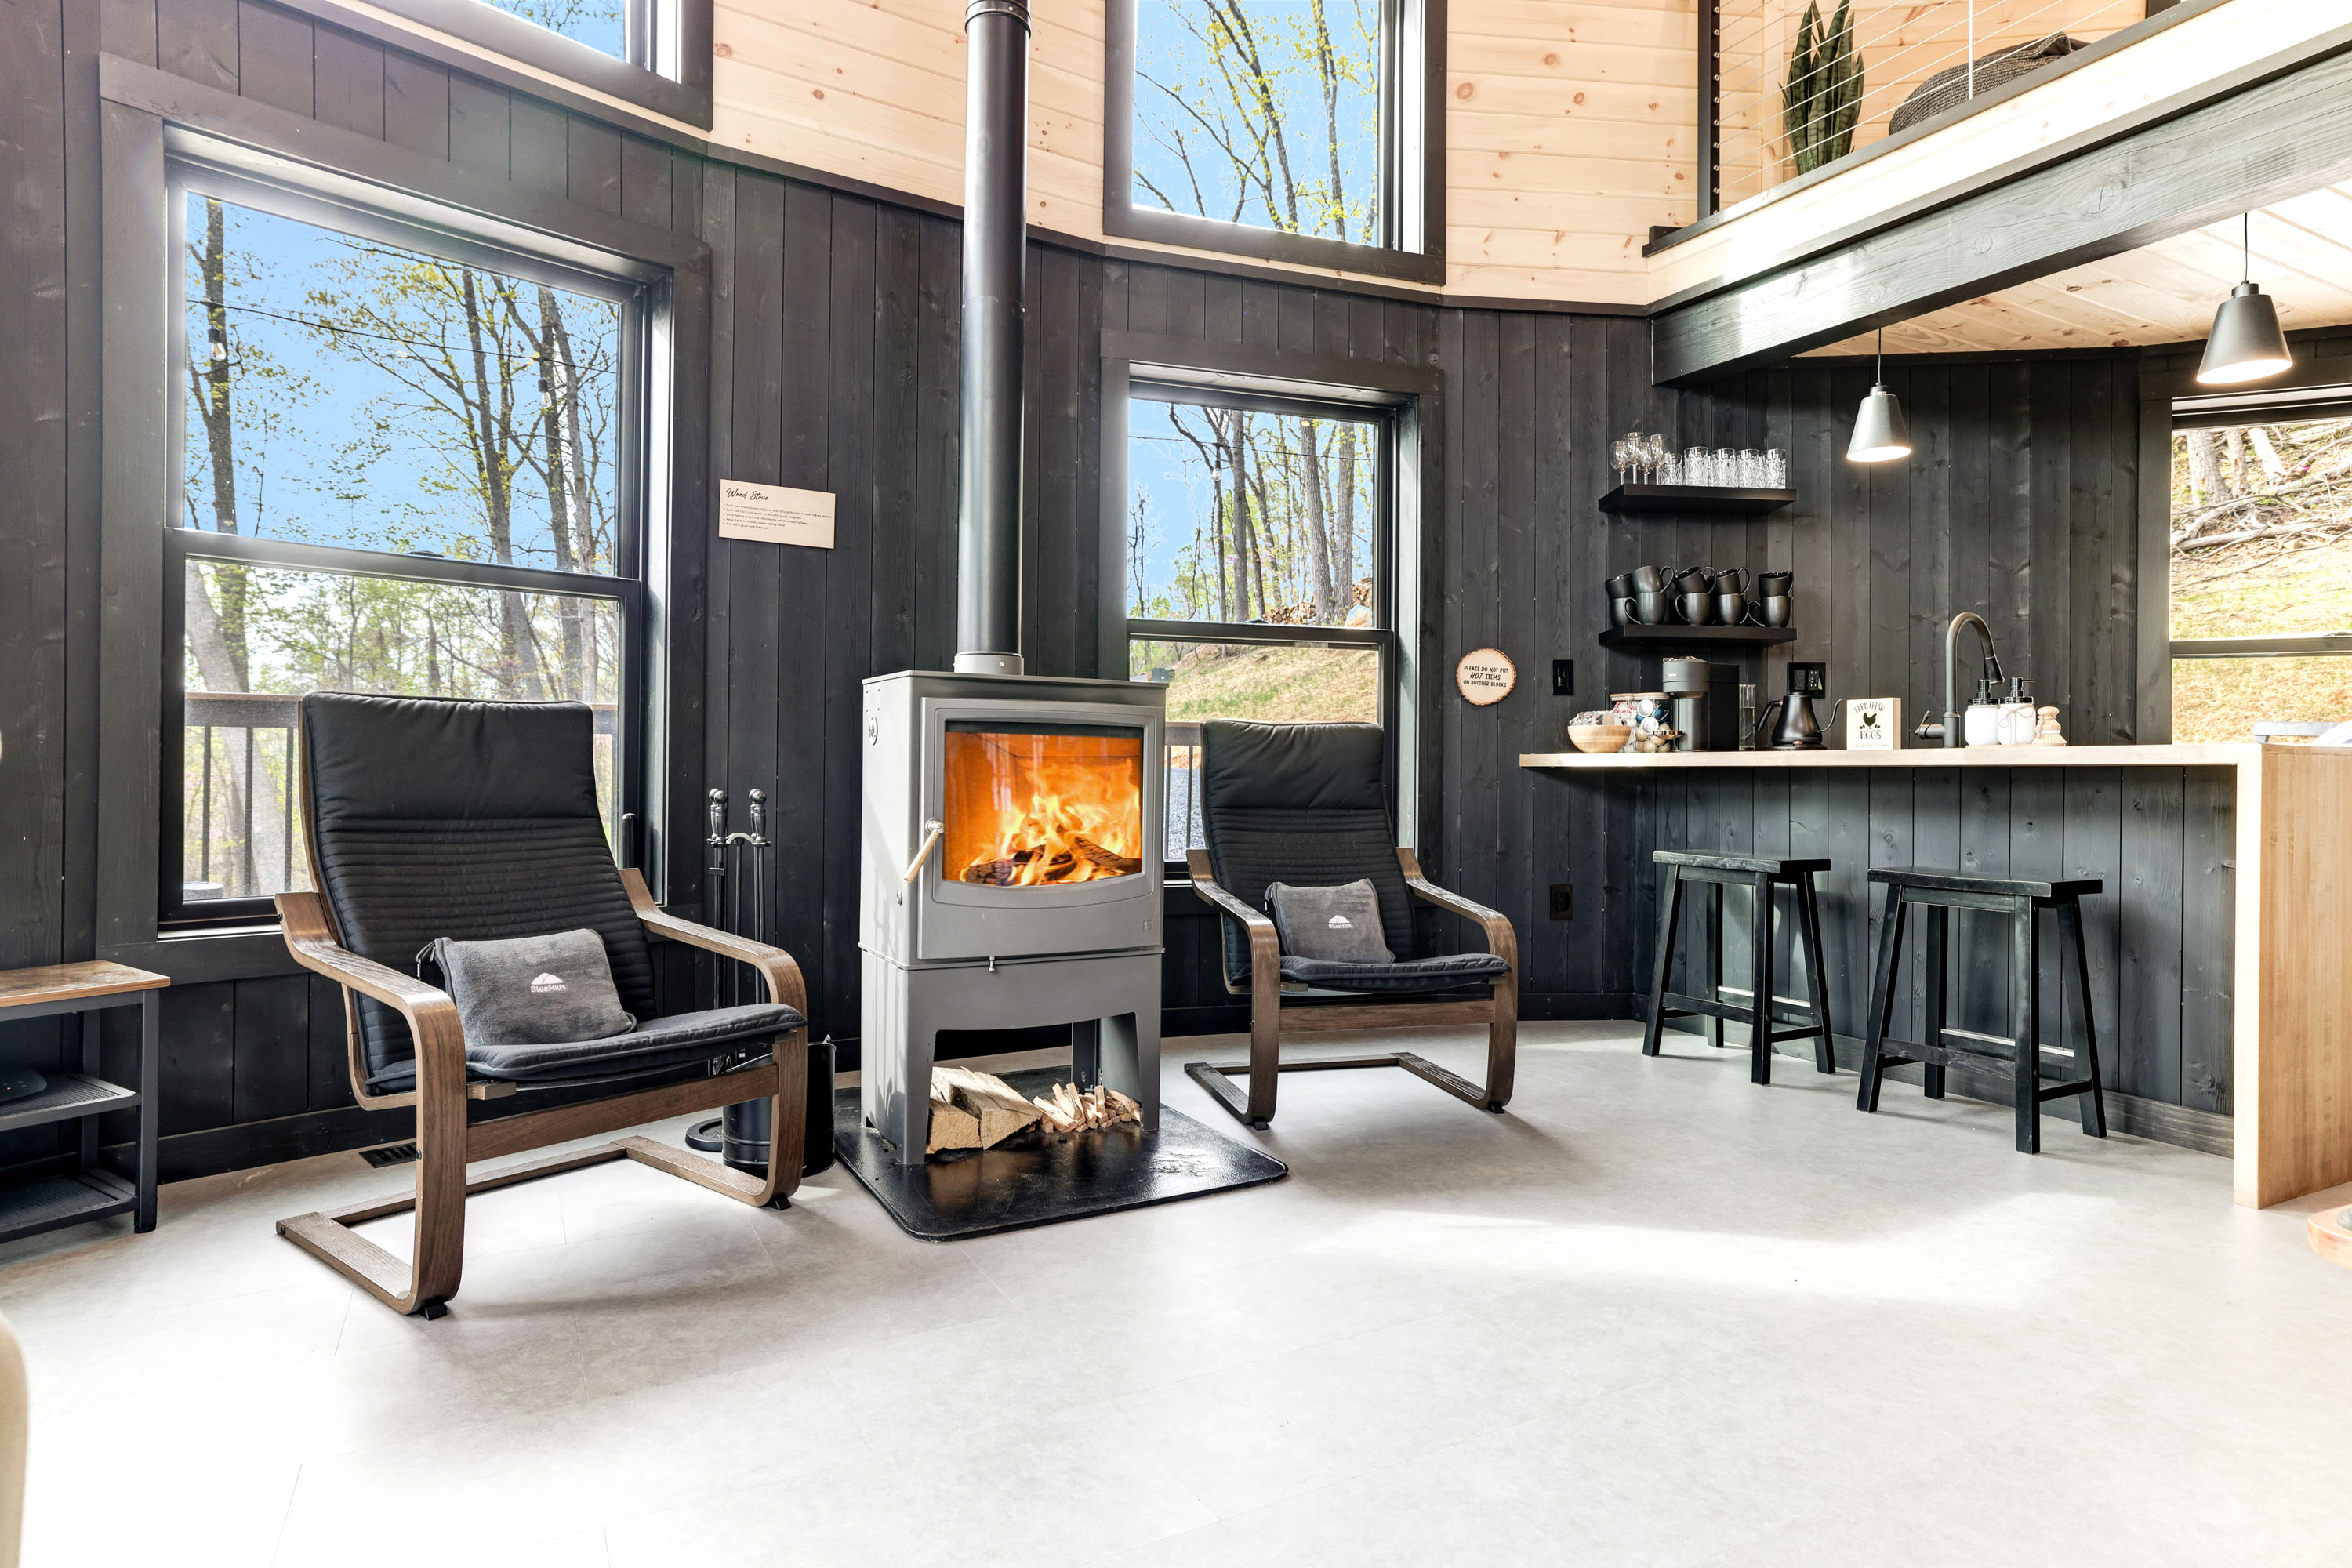 <span  class="uc_style_uc_tiles_grid_image_elementor_uc_items_attribute_title" style="color:#ffffff;">Wood Stove, Lounge Chairs, Kitchen Island, Bar Stools, Nespresso Coffee Machine - Skyline Yurt</span>